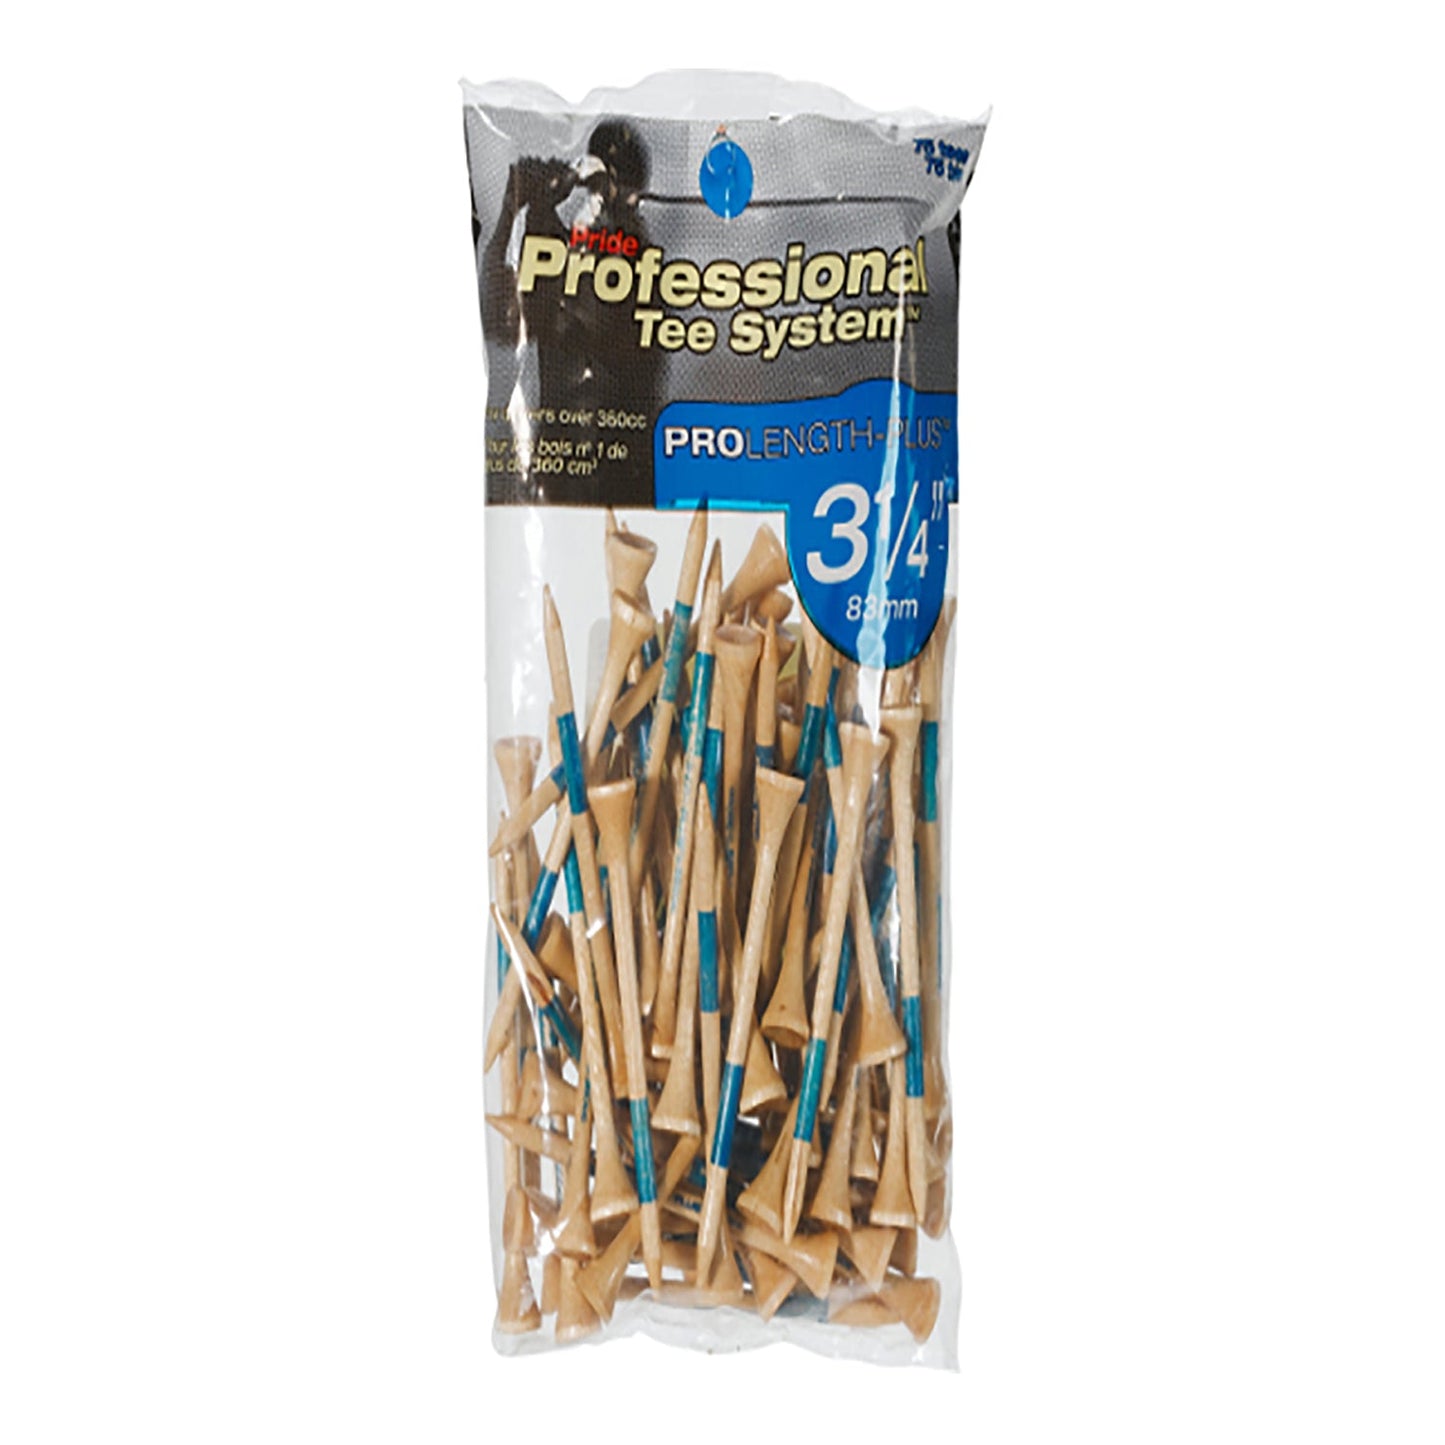 New Pride Sports Natural Professional Tee System ProLength-Plus Golf Tees